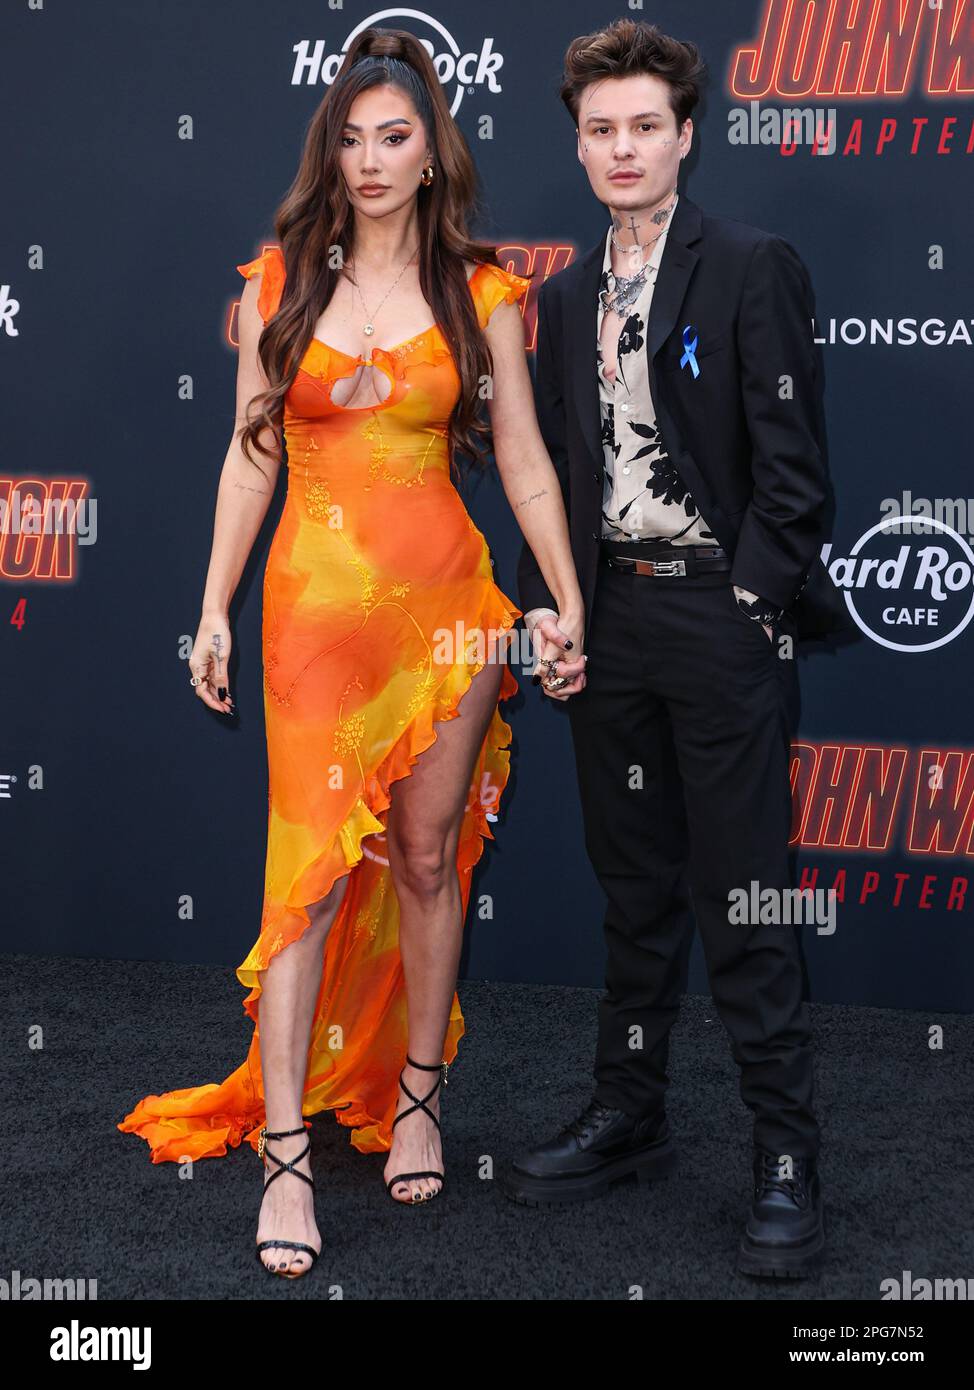 HOLLYWOOD, LOS ANGELES, CALIFORNIA, USA - MARCH 20: Francesca Farago and Jesse Sullivan arrive at the Los Angeles Premiere Of Lionsgate's 'John Wick: Chapter 4' held at the TCL Chinese Theatre IMAX on March 20, 2023 in Hollywood, Los Angeles, California, United States. (Photo by Xavier Collin/Image Press Agency) Stock Photo